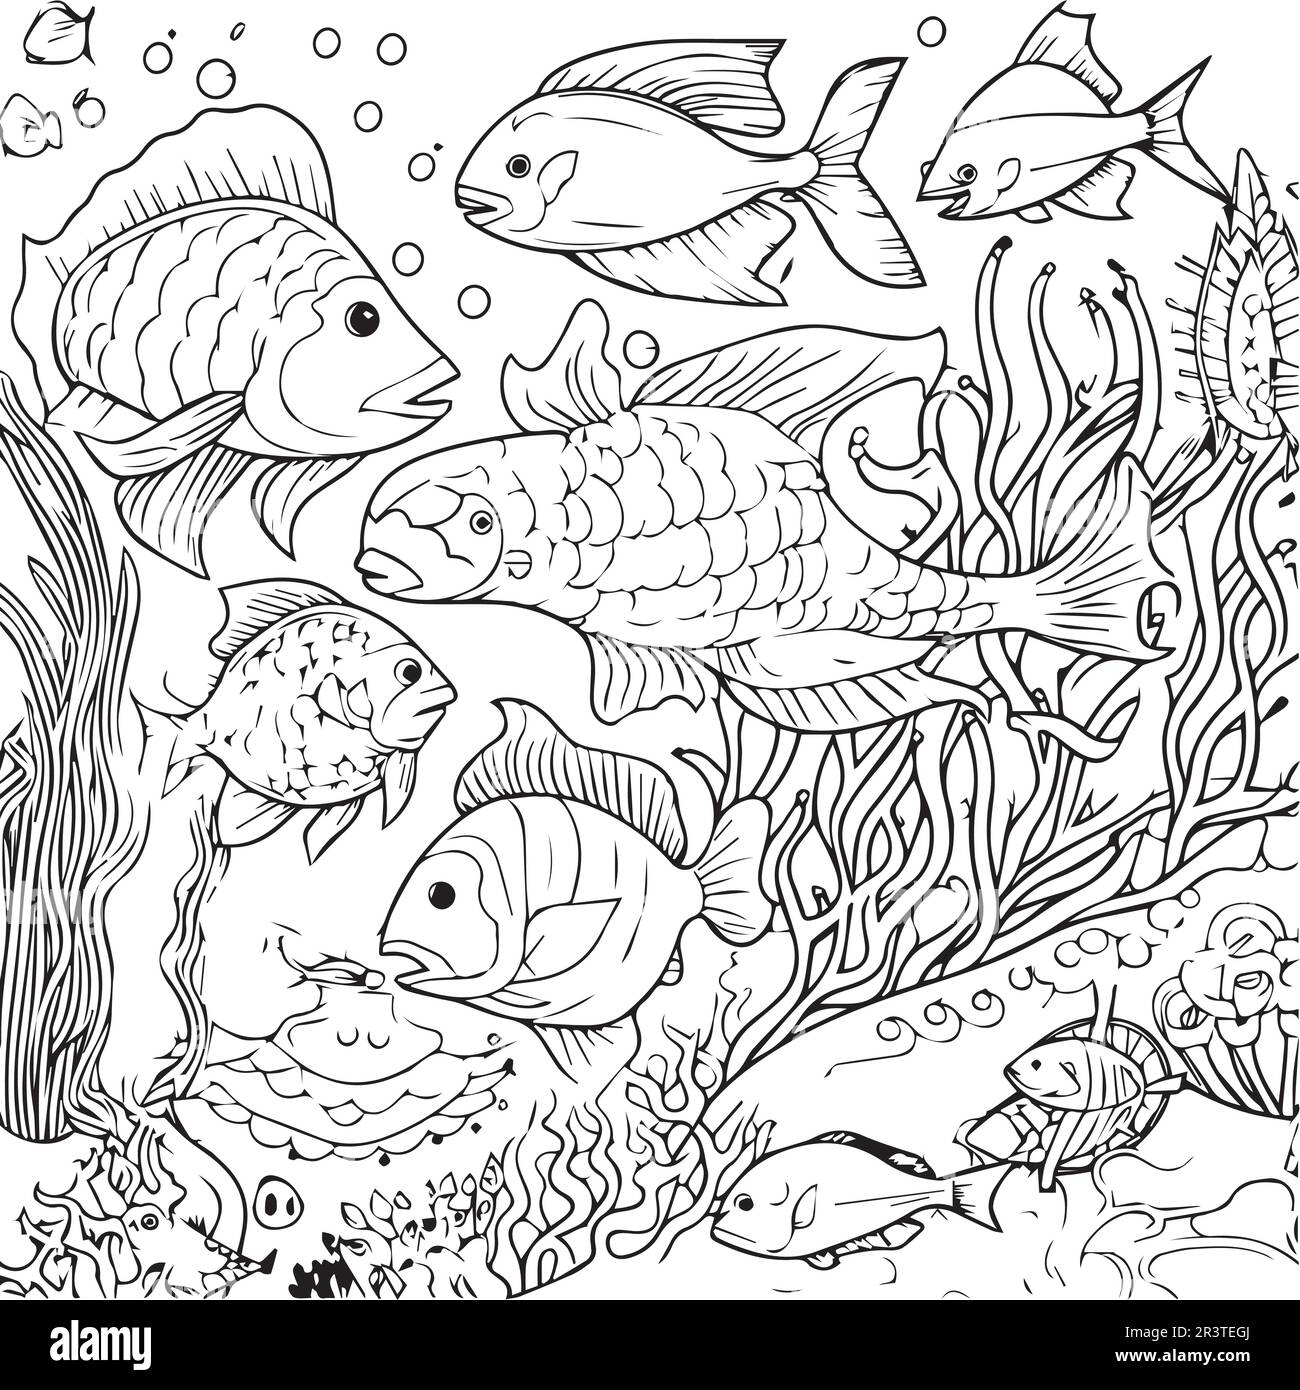 A set of fish coloring pages. Stock Vector